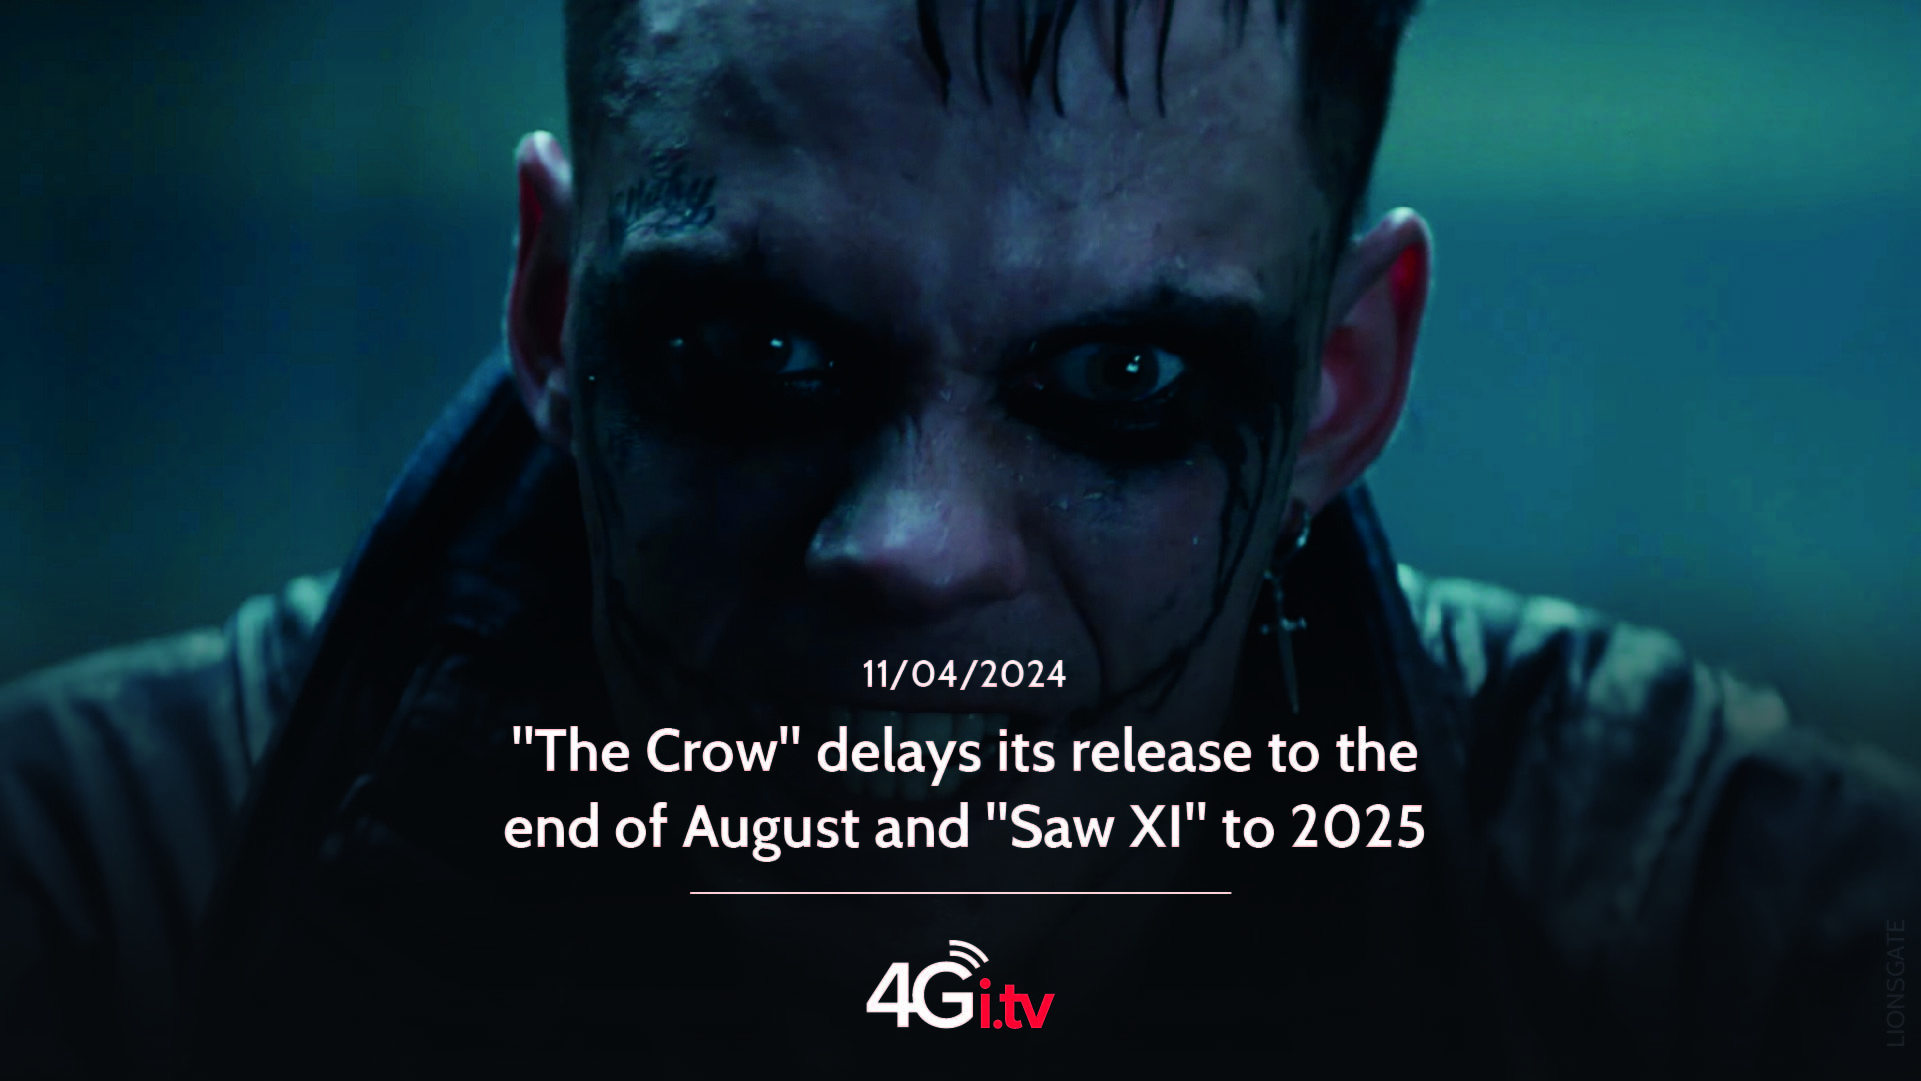 Подробнее о статье “The Crow” delays its release to the end of August and “Saw XI” to 2025